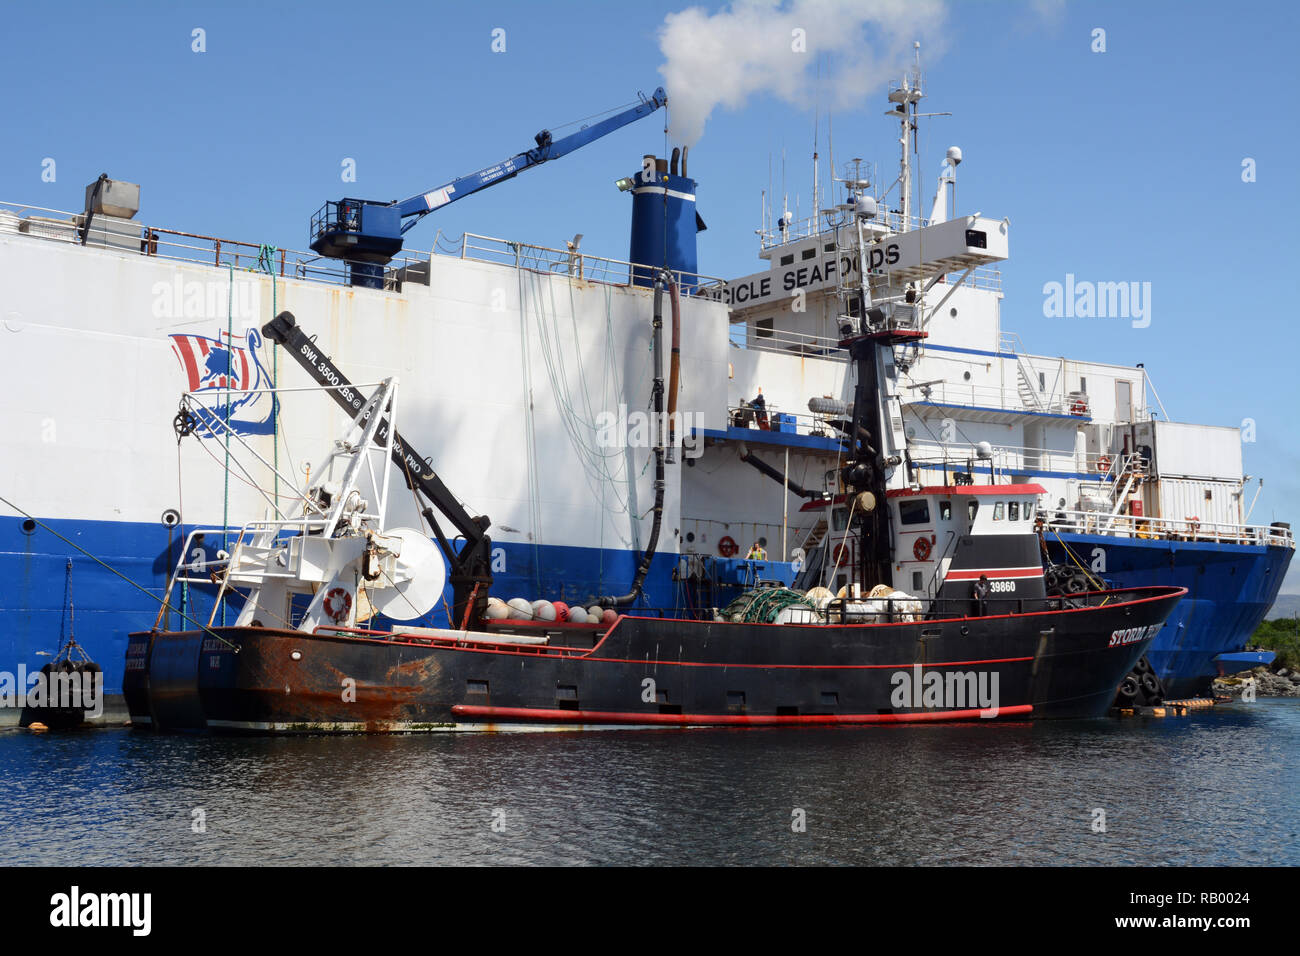 A commercial fishing boat unloads its cargo of fresh fish onto a floating seafood processing ship in Dutch Harbor, Unalaska, Alaska, United States. Stock Photo